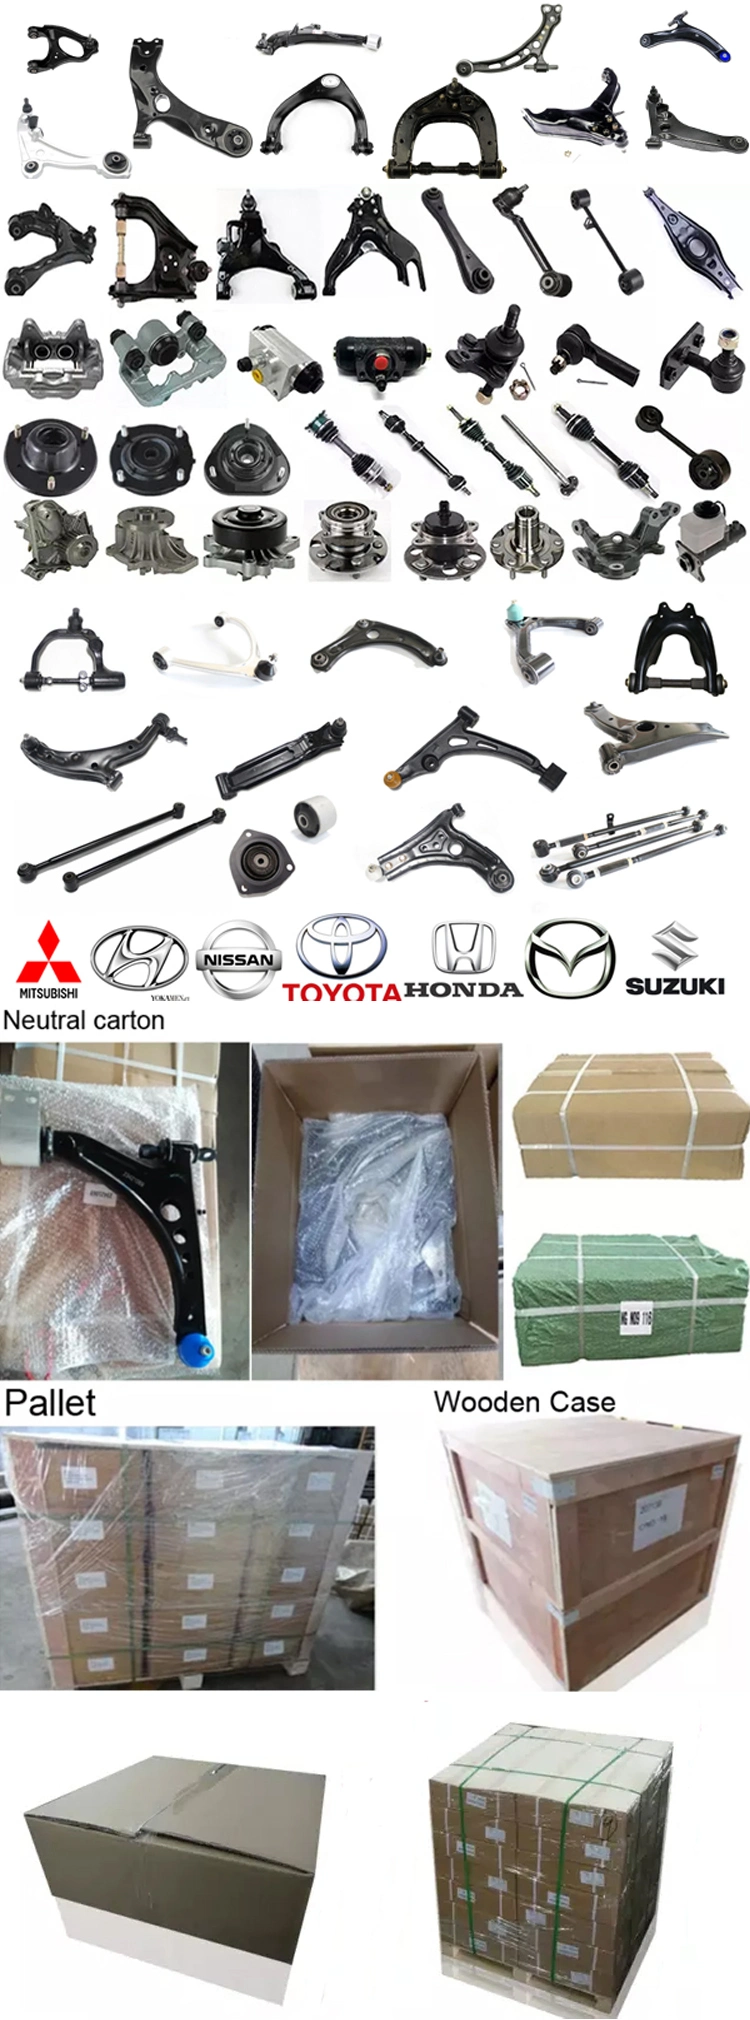 Original High Quality Cheap and High Performance Suspension System Upper Control Arm 9044293 Dongfeng